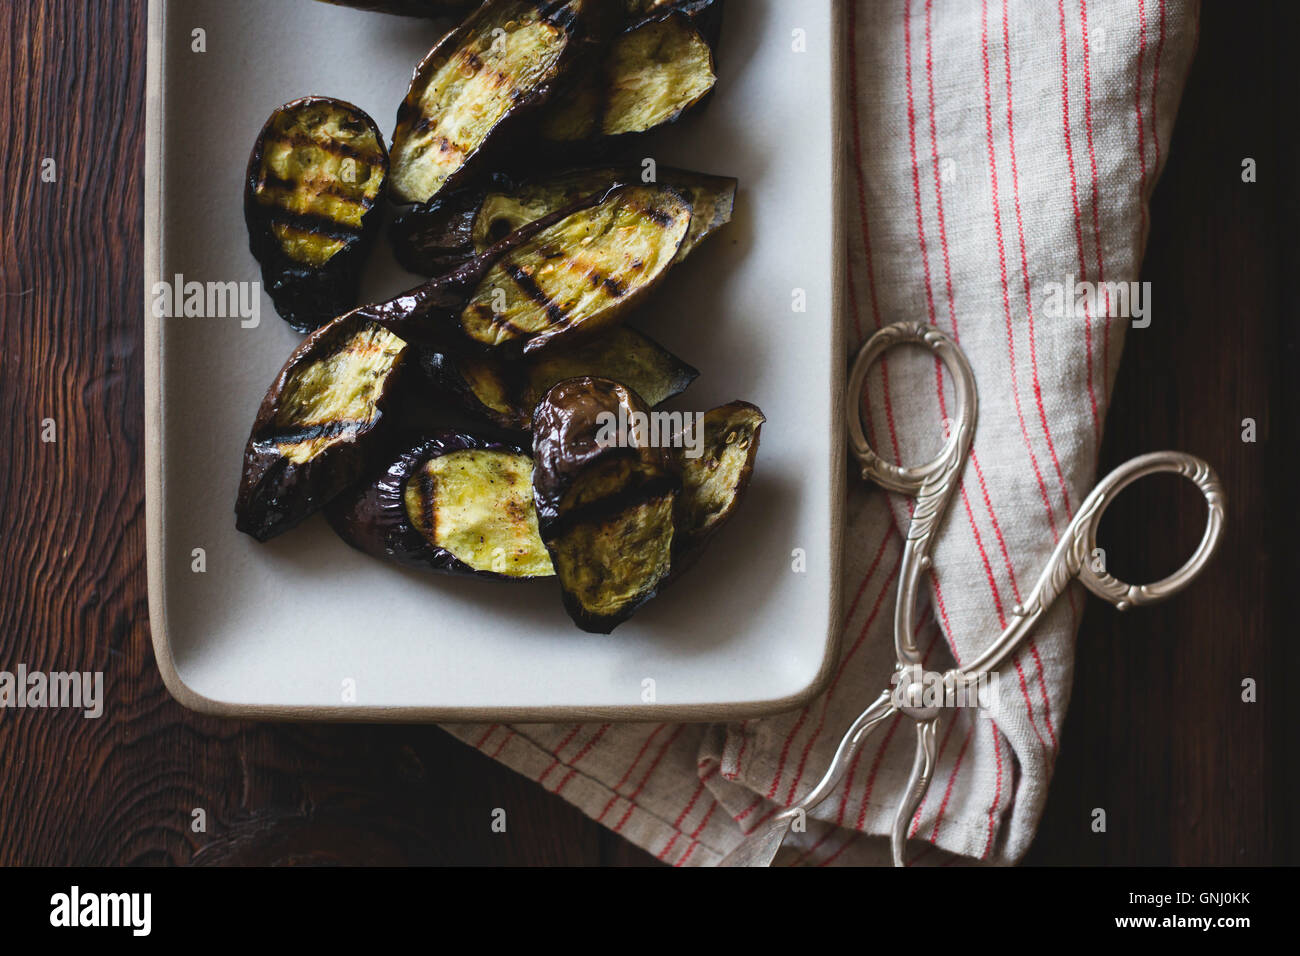 Eggplant in a serving dish Stock Photo